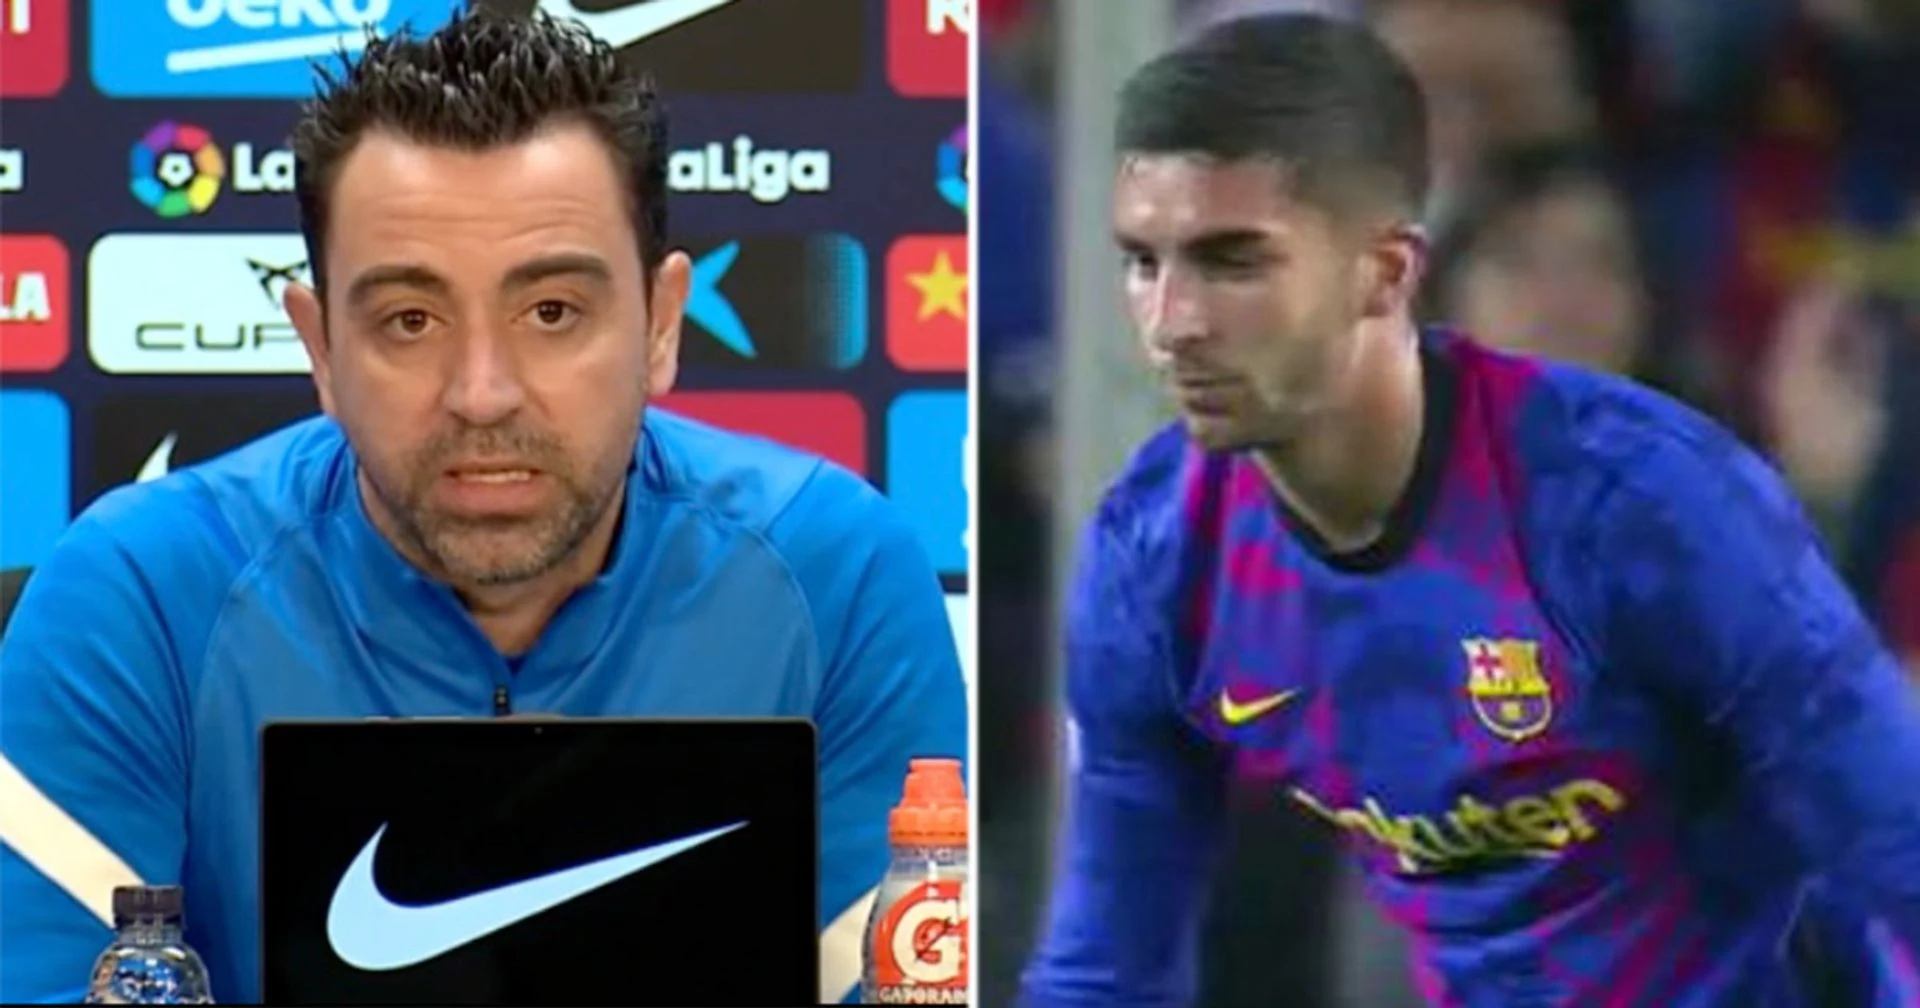 Ferran benched: Xavi's frontline trio for Elche game revealed by reporters